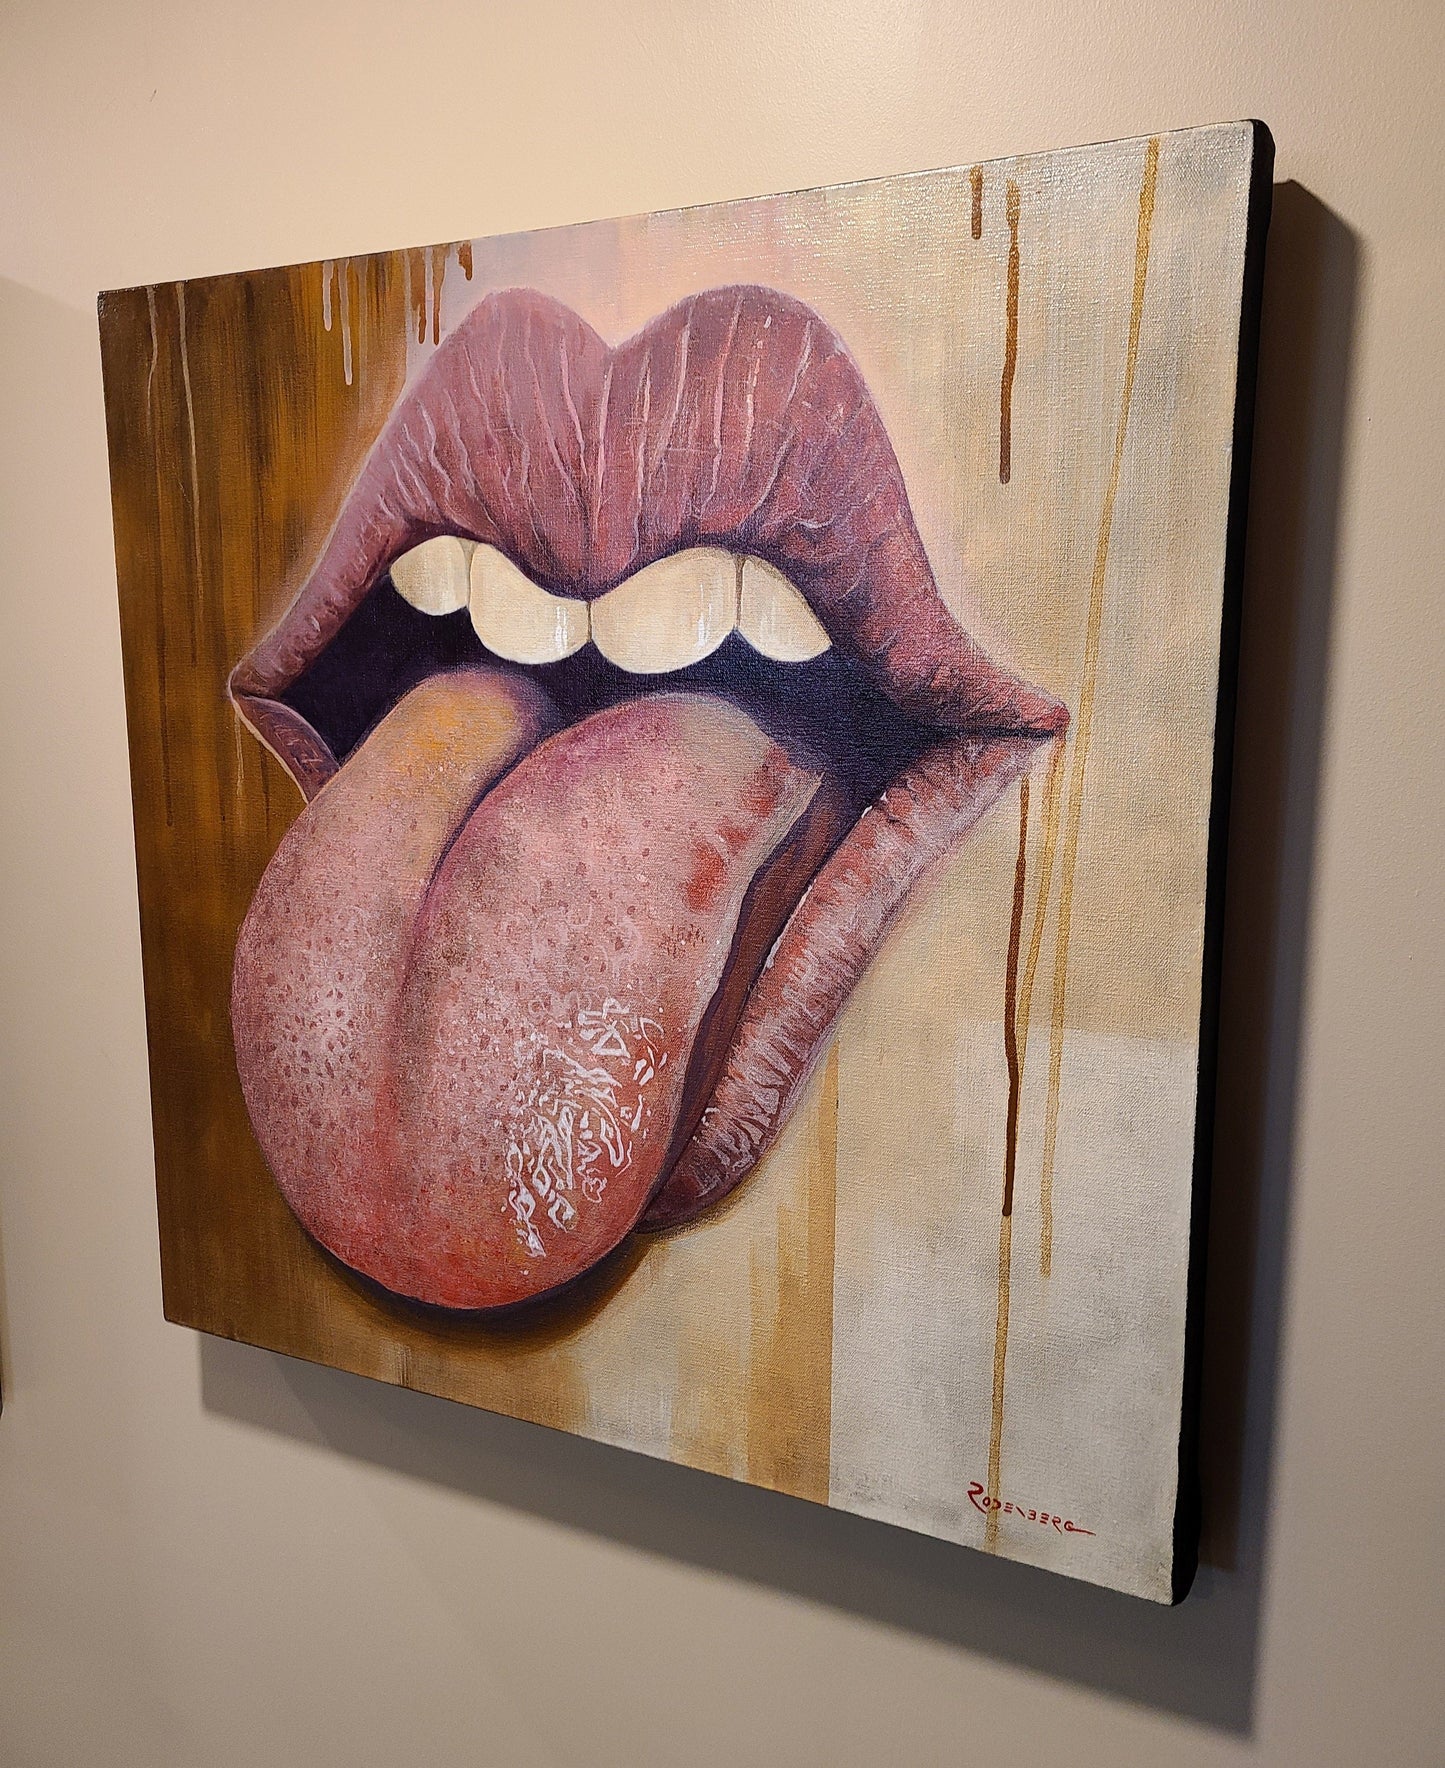 Rolling Stones Tongue